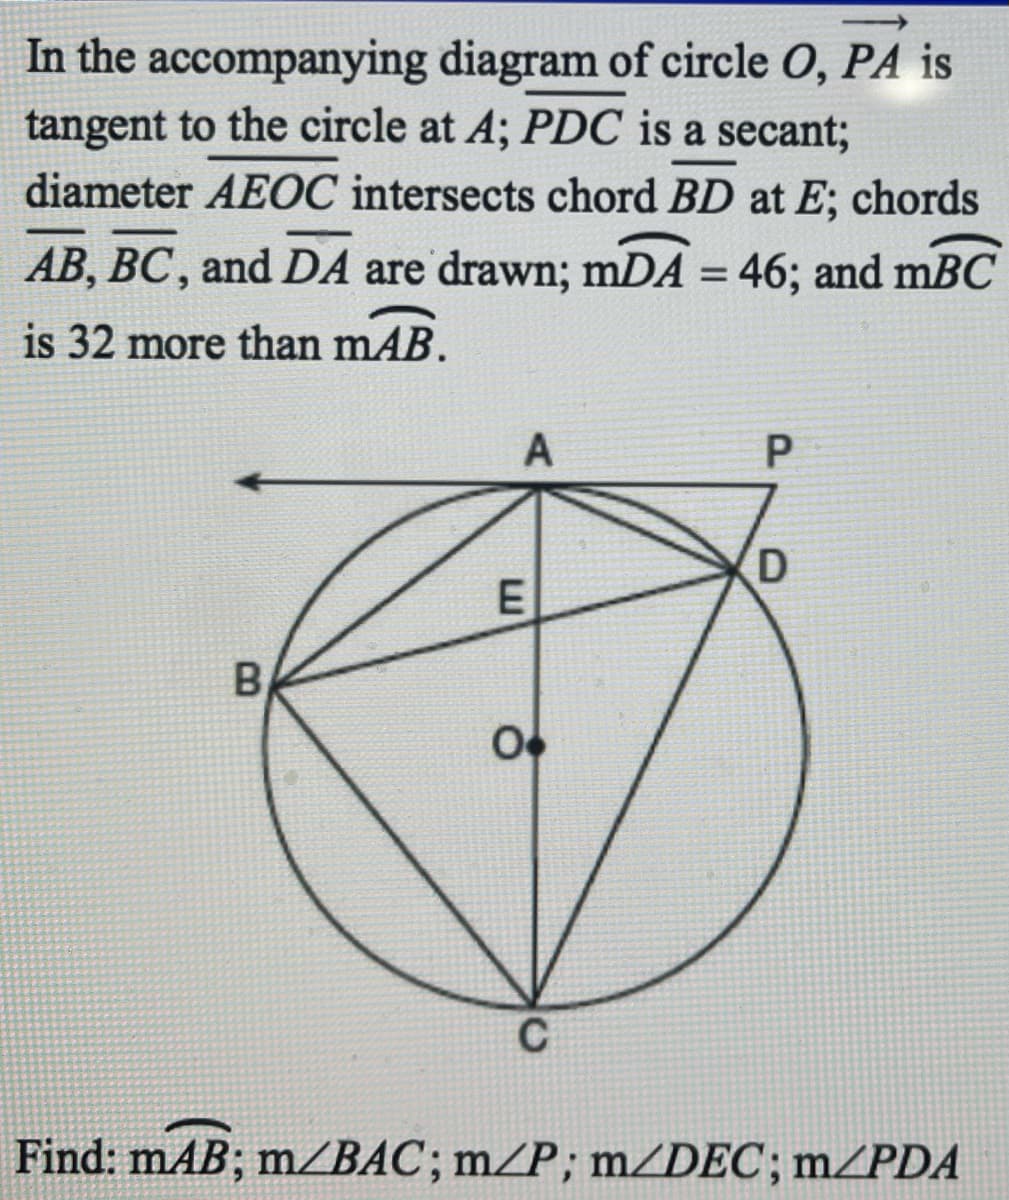 In the accompanying diagram of circle O, PA is
tangent to the circle at A; PDC is a secant;
diameter AEOC intersects chord BD at E; chords
AB, BC, and DA are drawn; mDA = 46; and mBC
%3D
is 32 more than mAB.
A
E
B
C
Find: mAB; m/BAC; m/P; mZDEC; m/PDA
